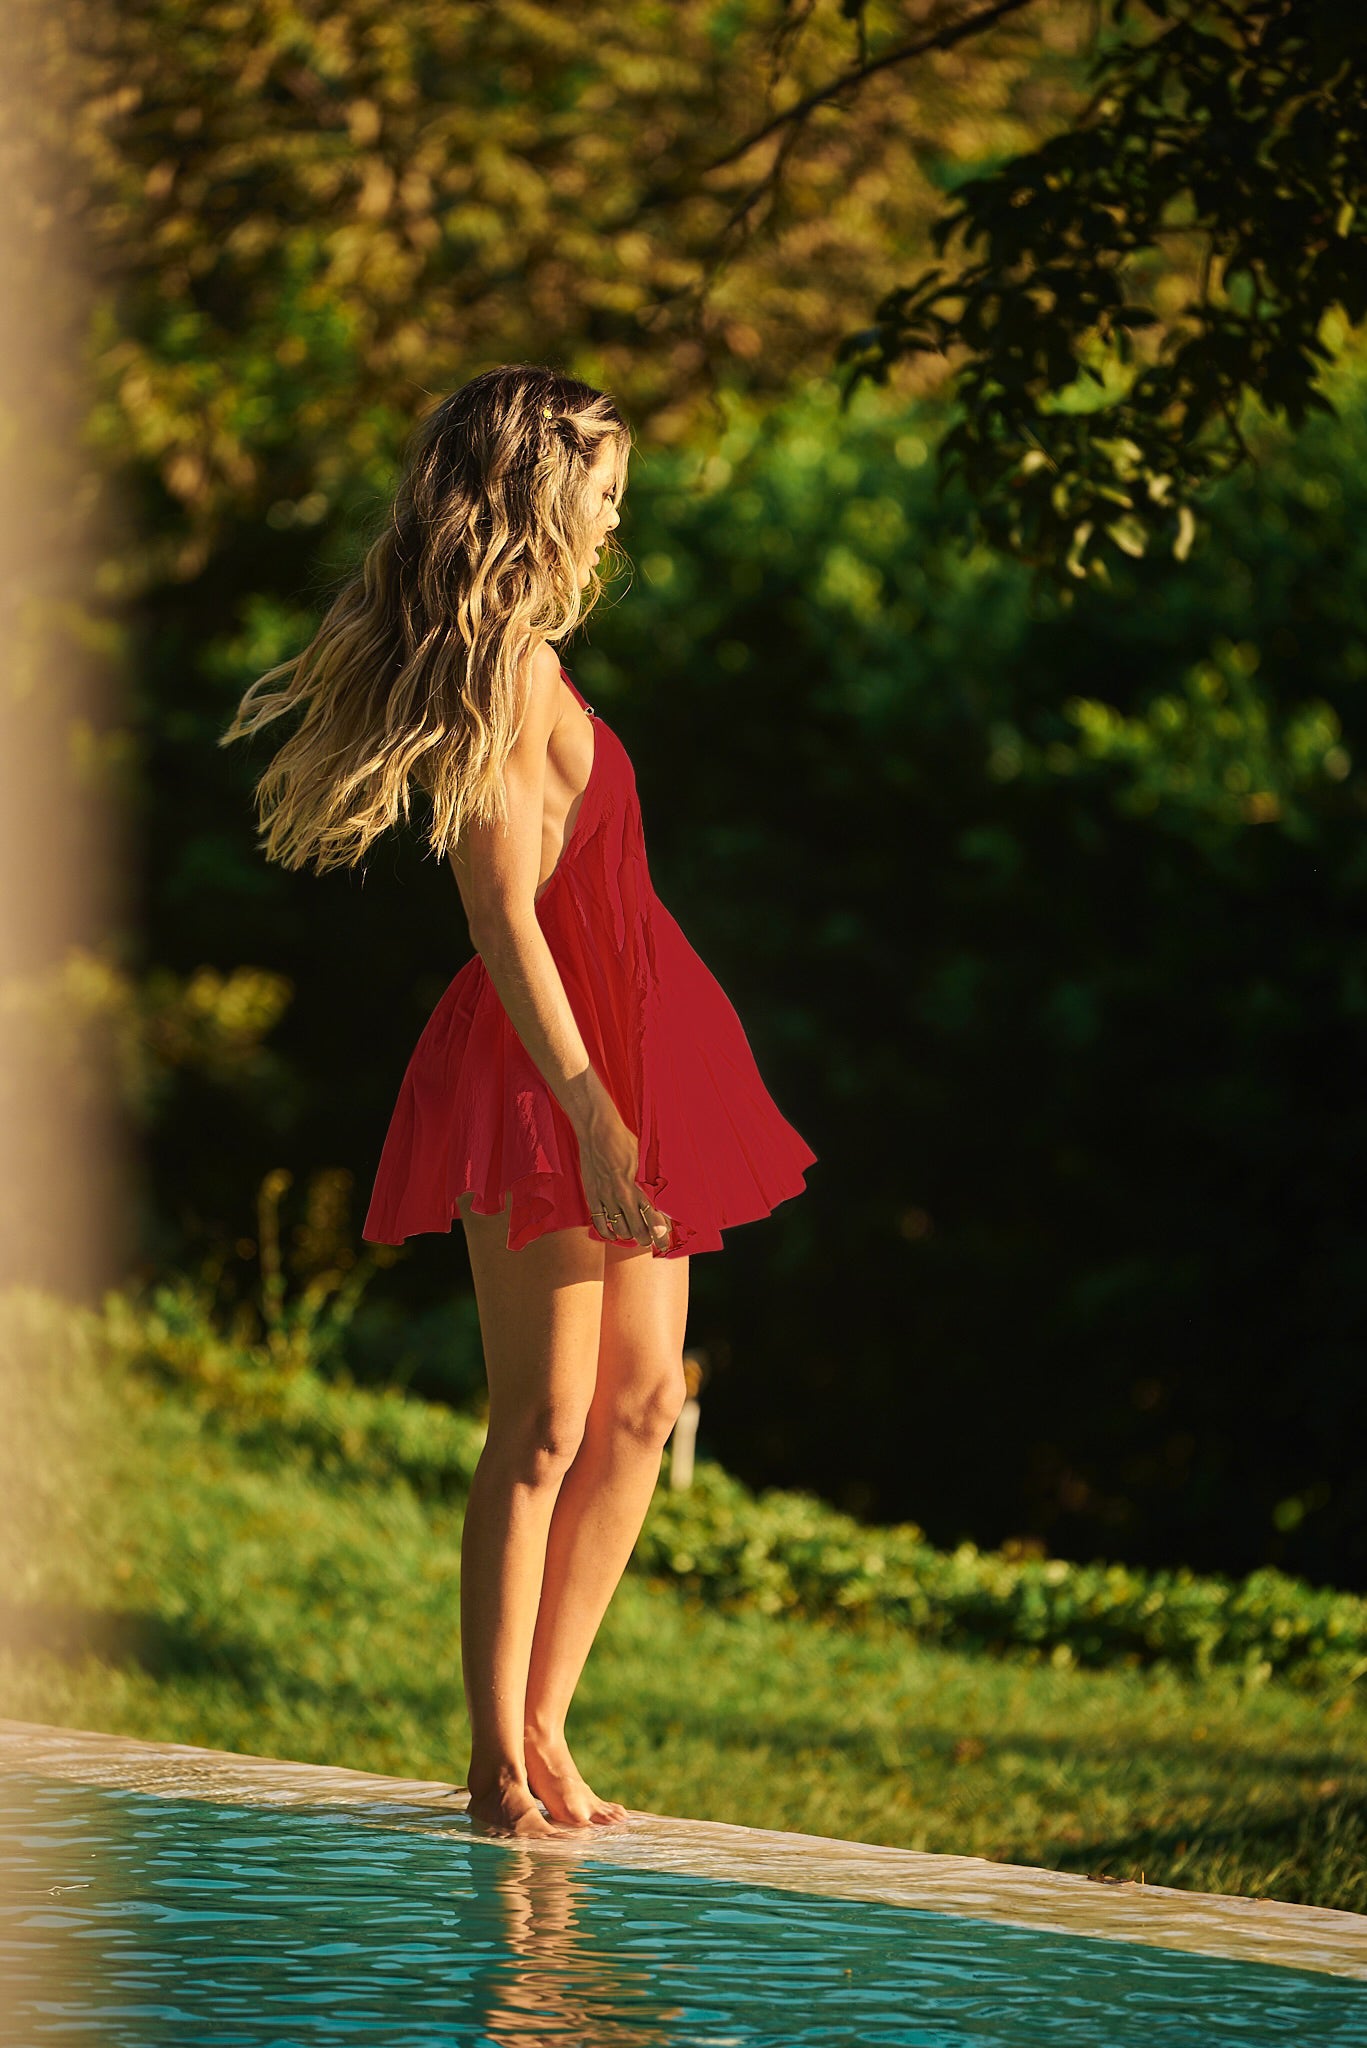 Stay cool and stylish in a red Lonarc cotton short dress by the pool